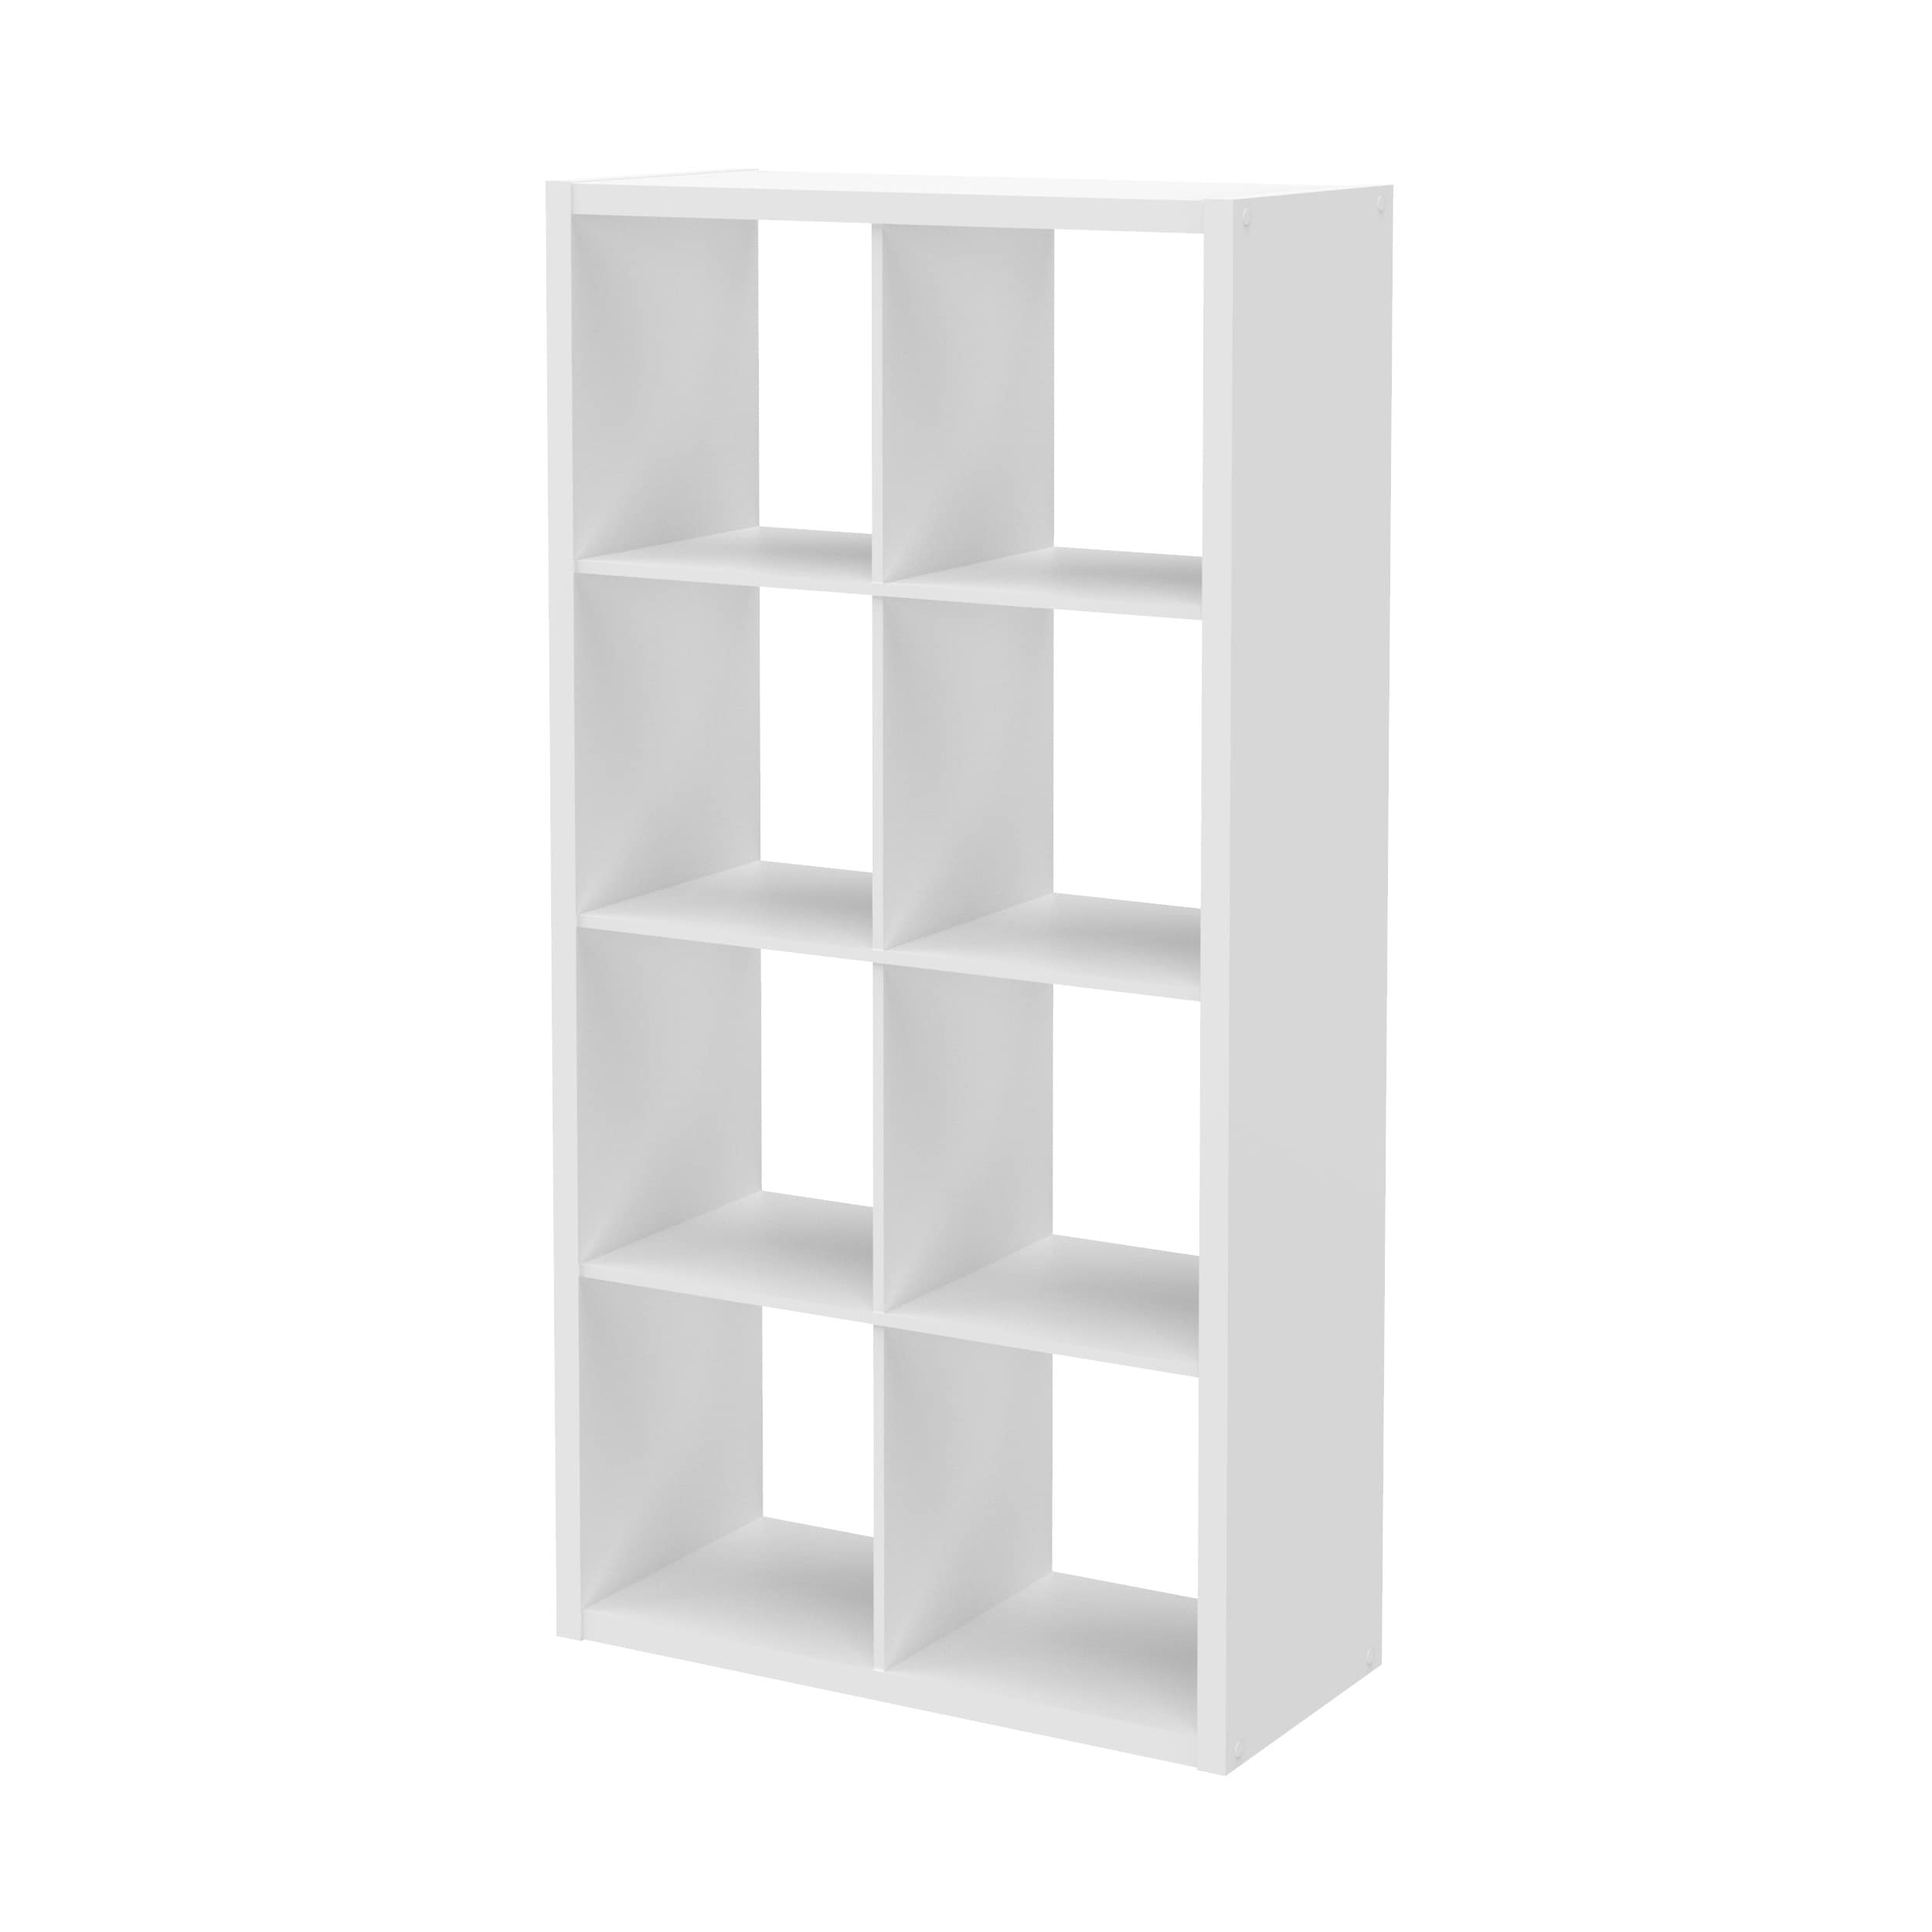 8 Cube Open Storage Organizer Shelves Bookcase Easy Assembly Multiple Colors New 